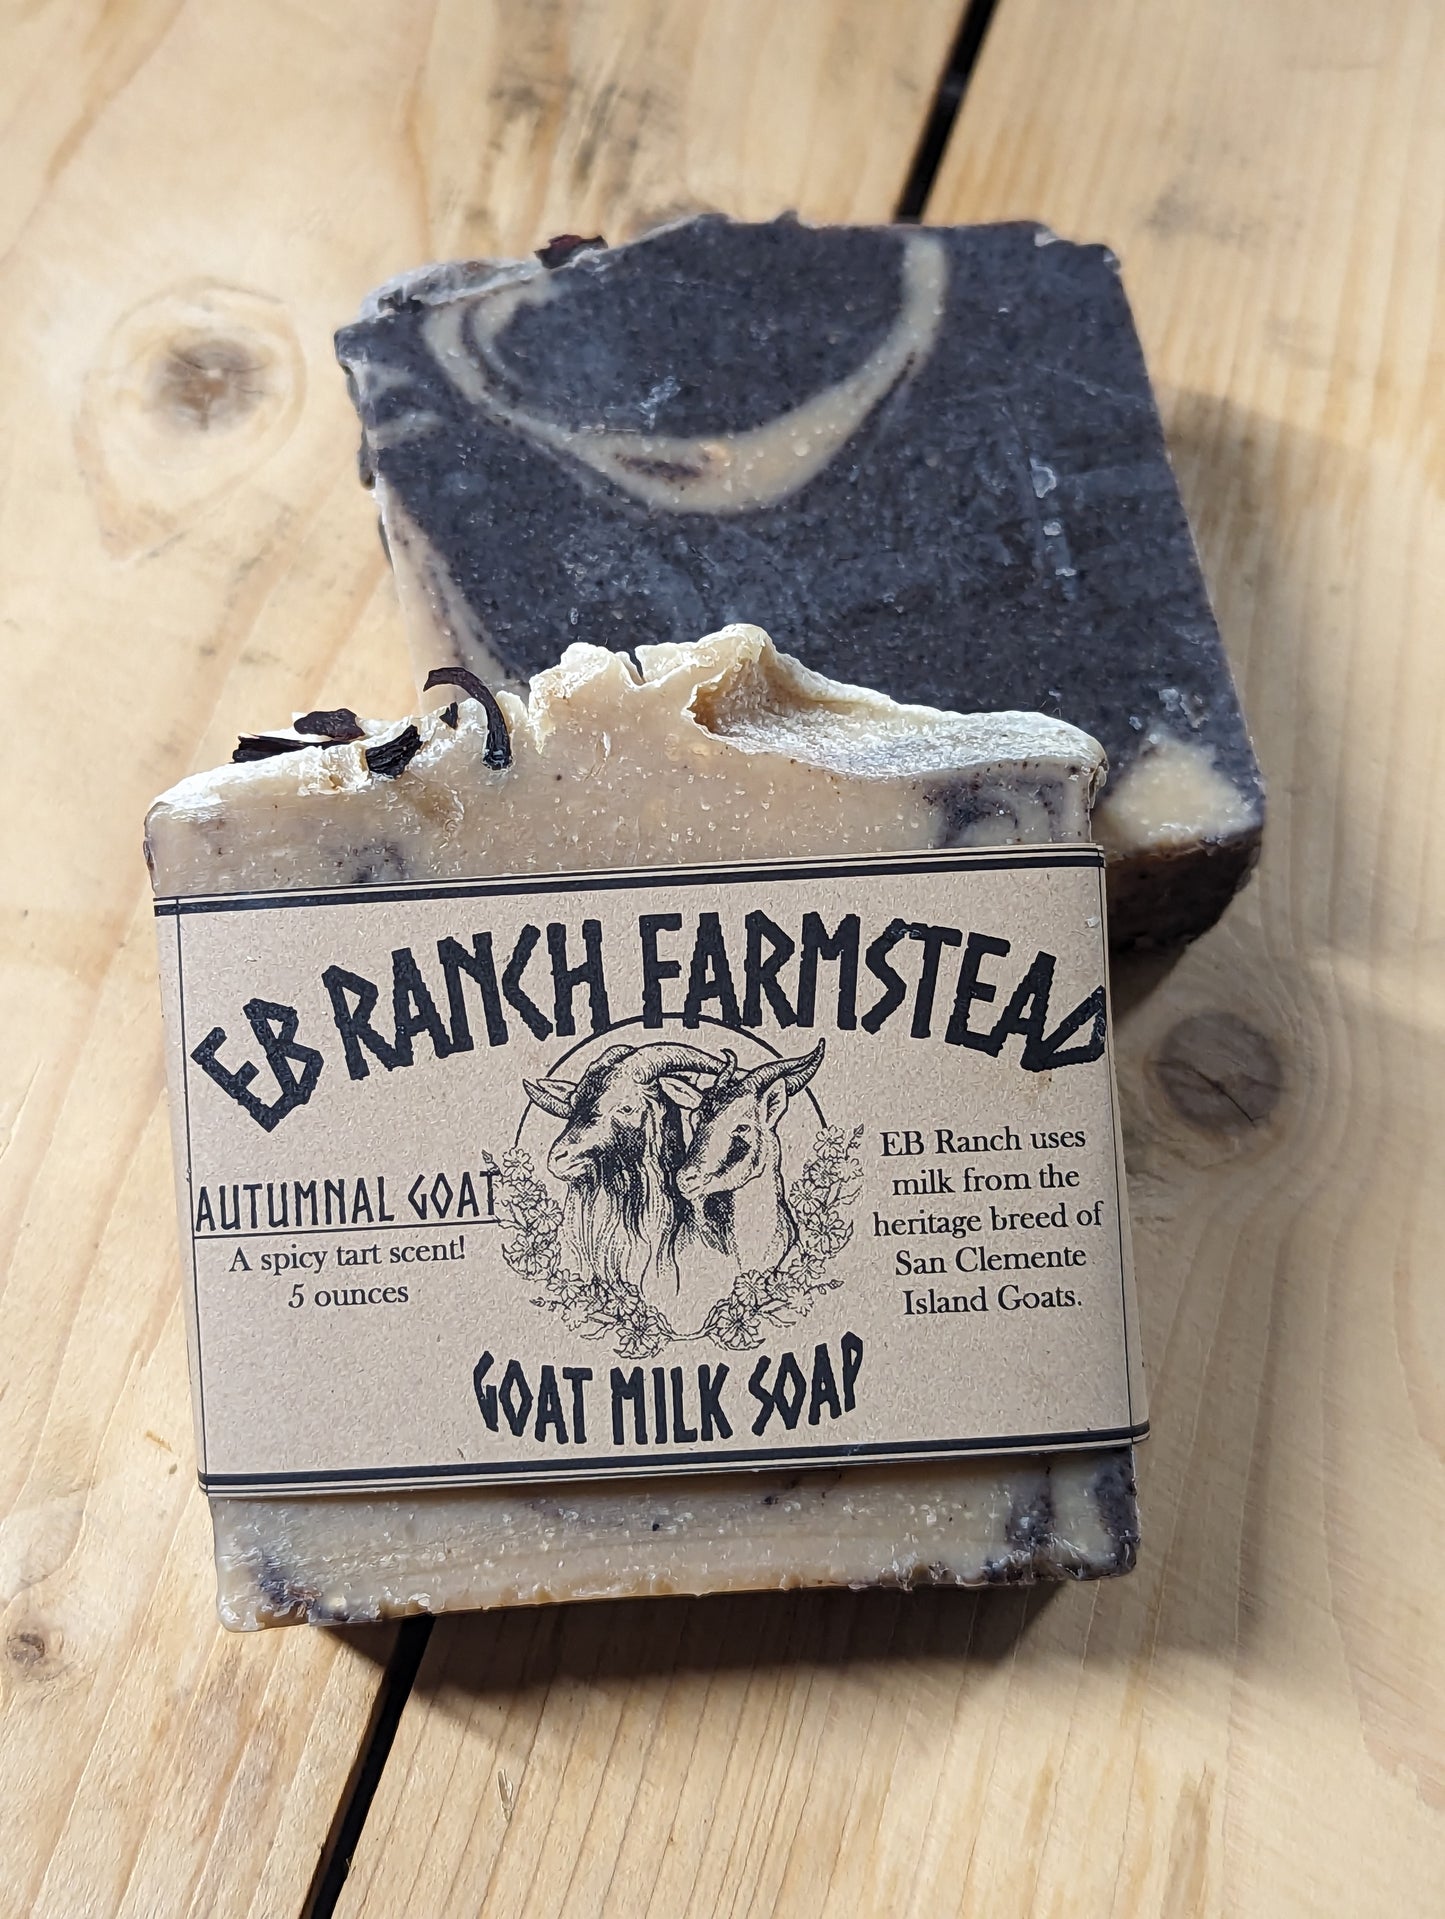 Bar of Wild Haven Farm's Autumnal Goat goat milk soap made with San Clemente Island goat milk